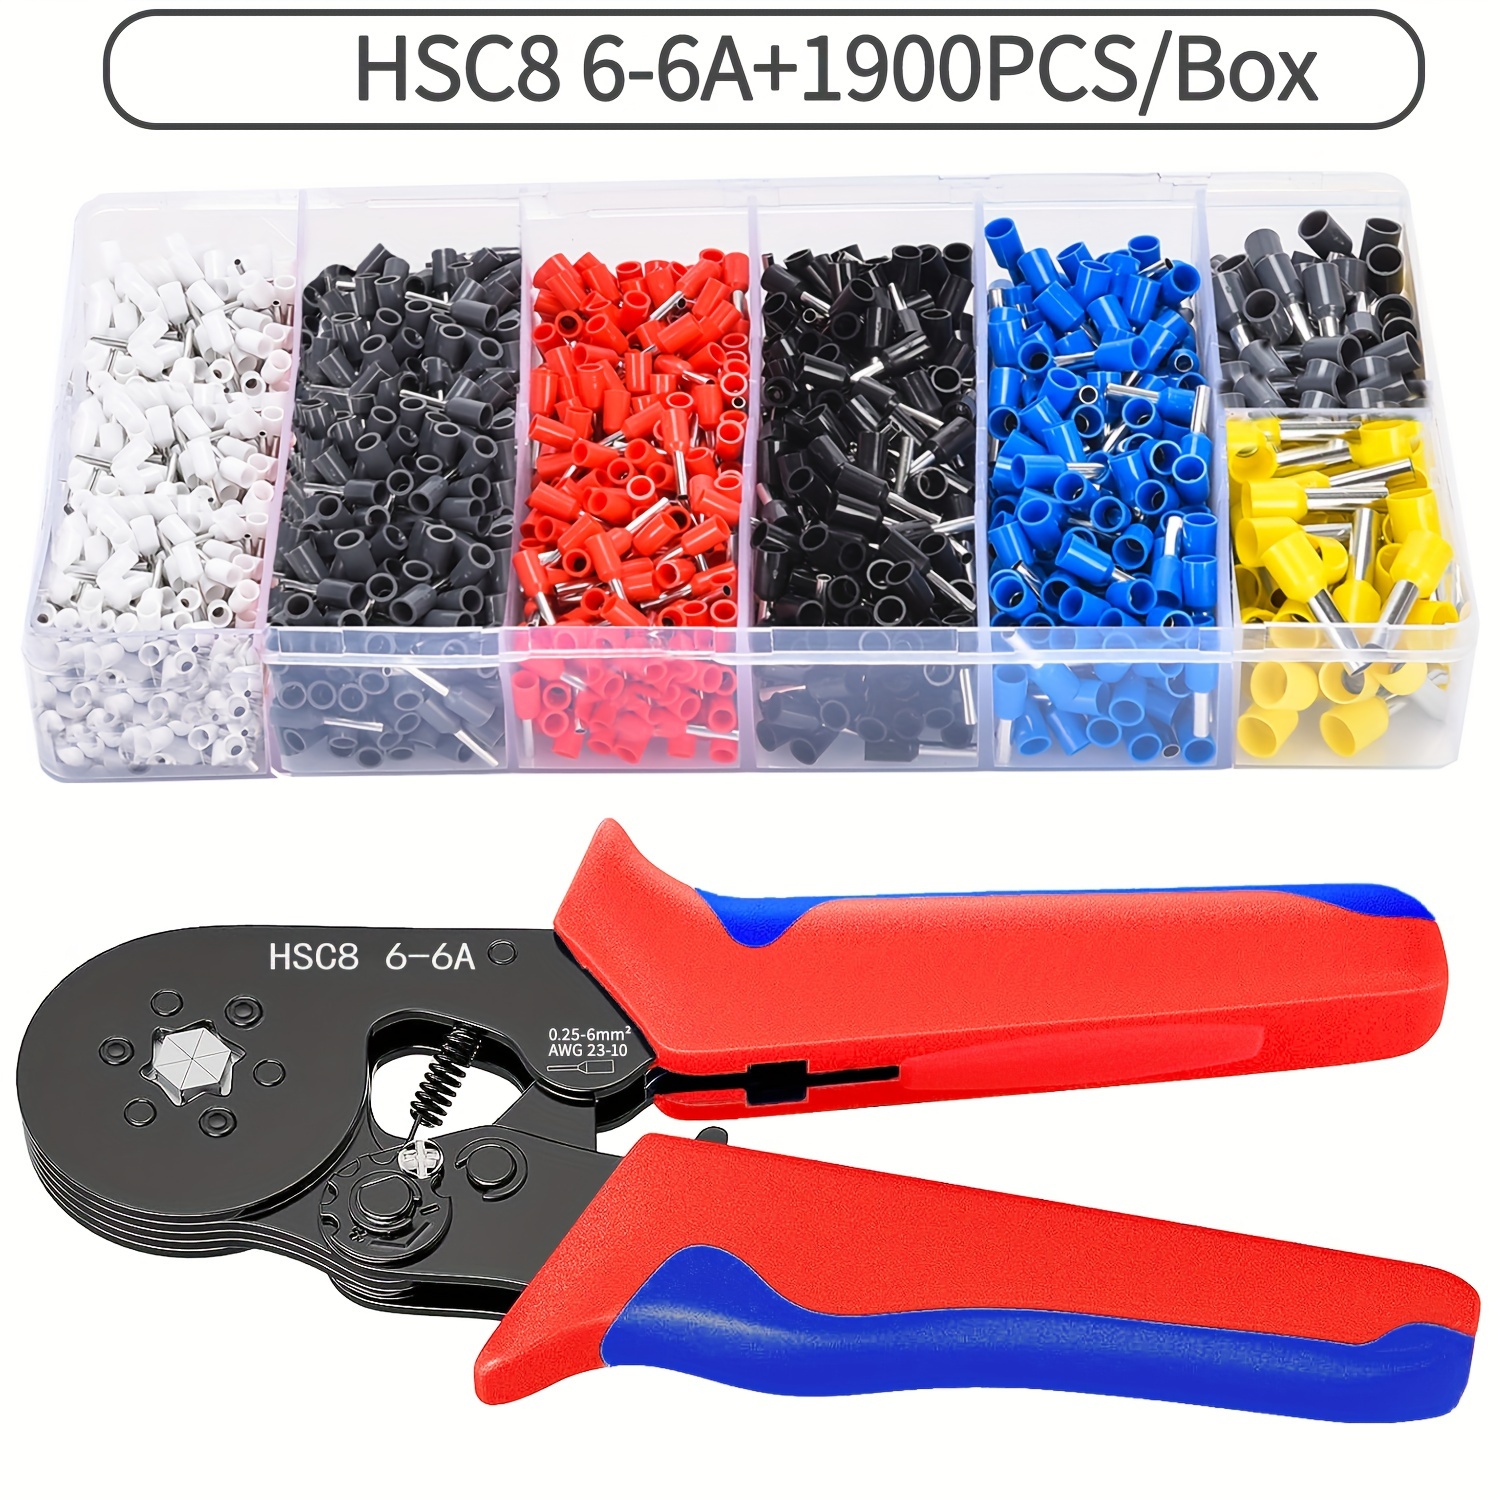 Ferrule Crimping Tool Kit, Ferrule Crimper Plier (AWG23-10),  Self-adjustable Ratchet Crimping Tool Kit for Ferrules Connectors Pin  Terminals Cable End